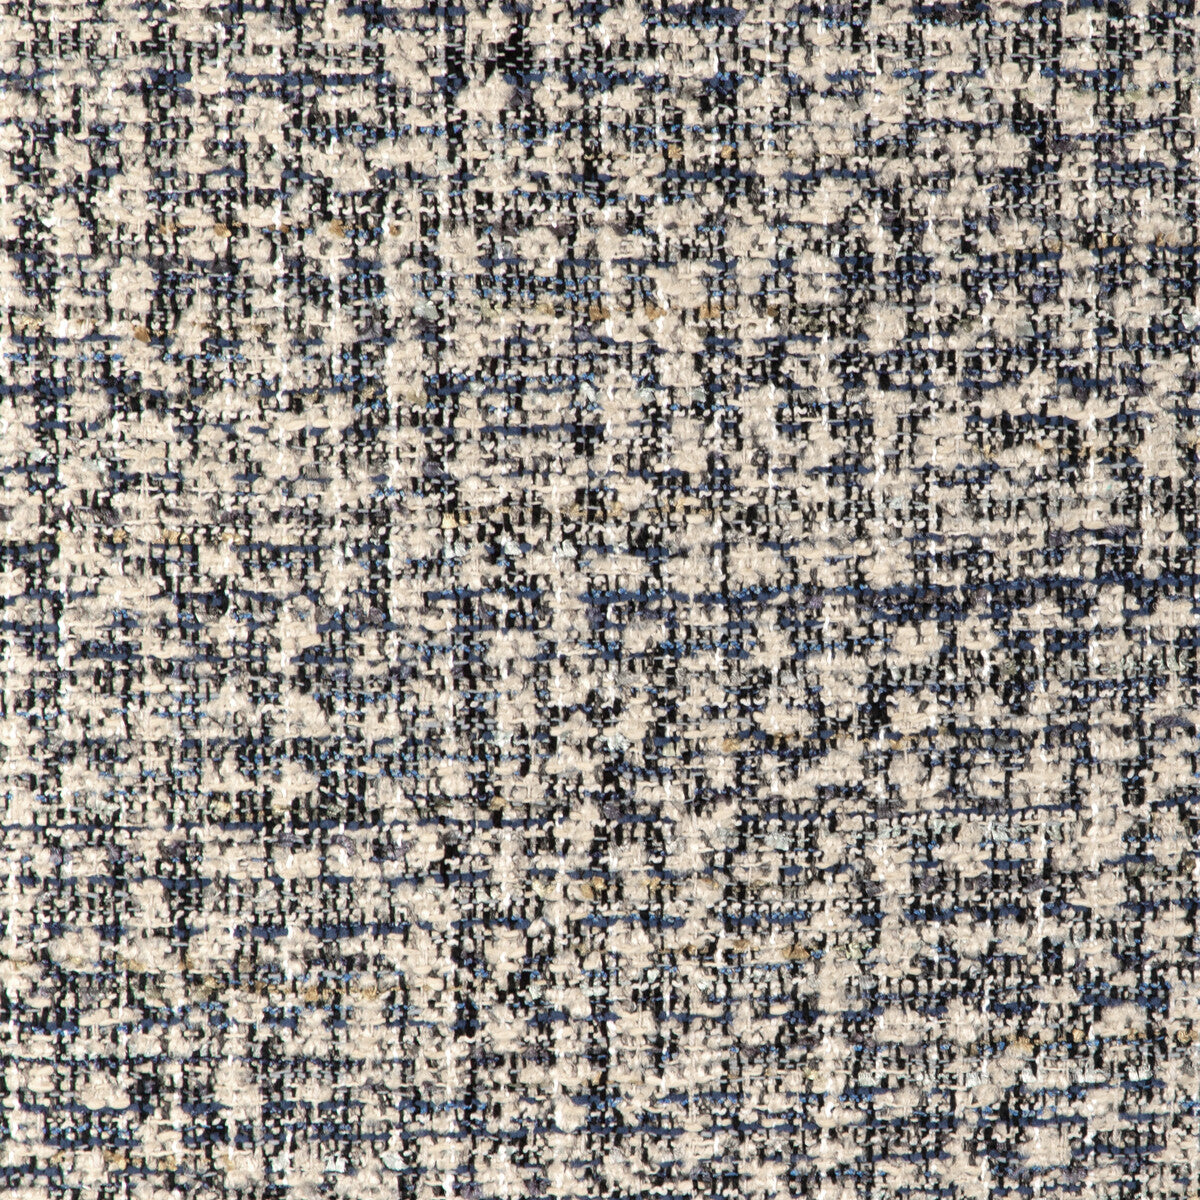 Kravet Design fabric in 37119-50 color - pattern 37119.50.0 - by Kravet Design in the Woven Colors collection